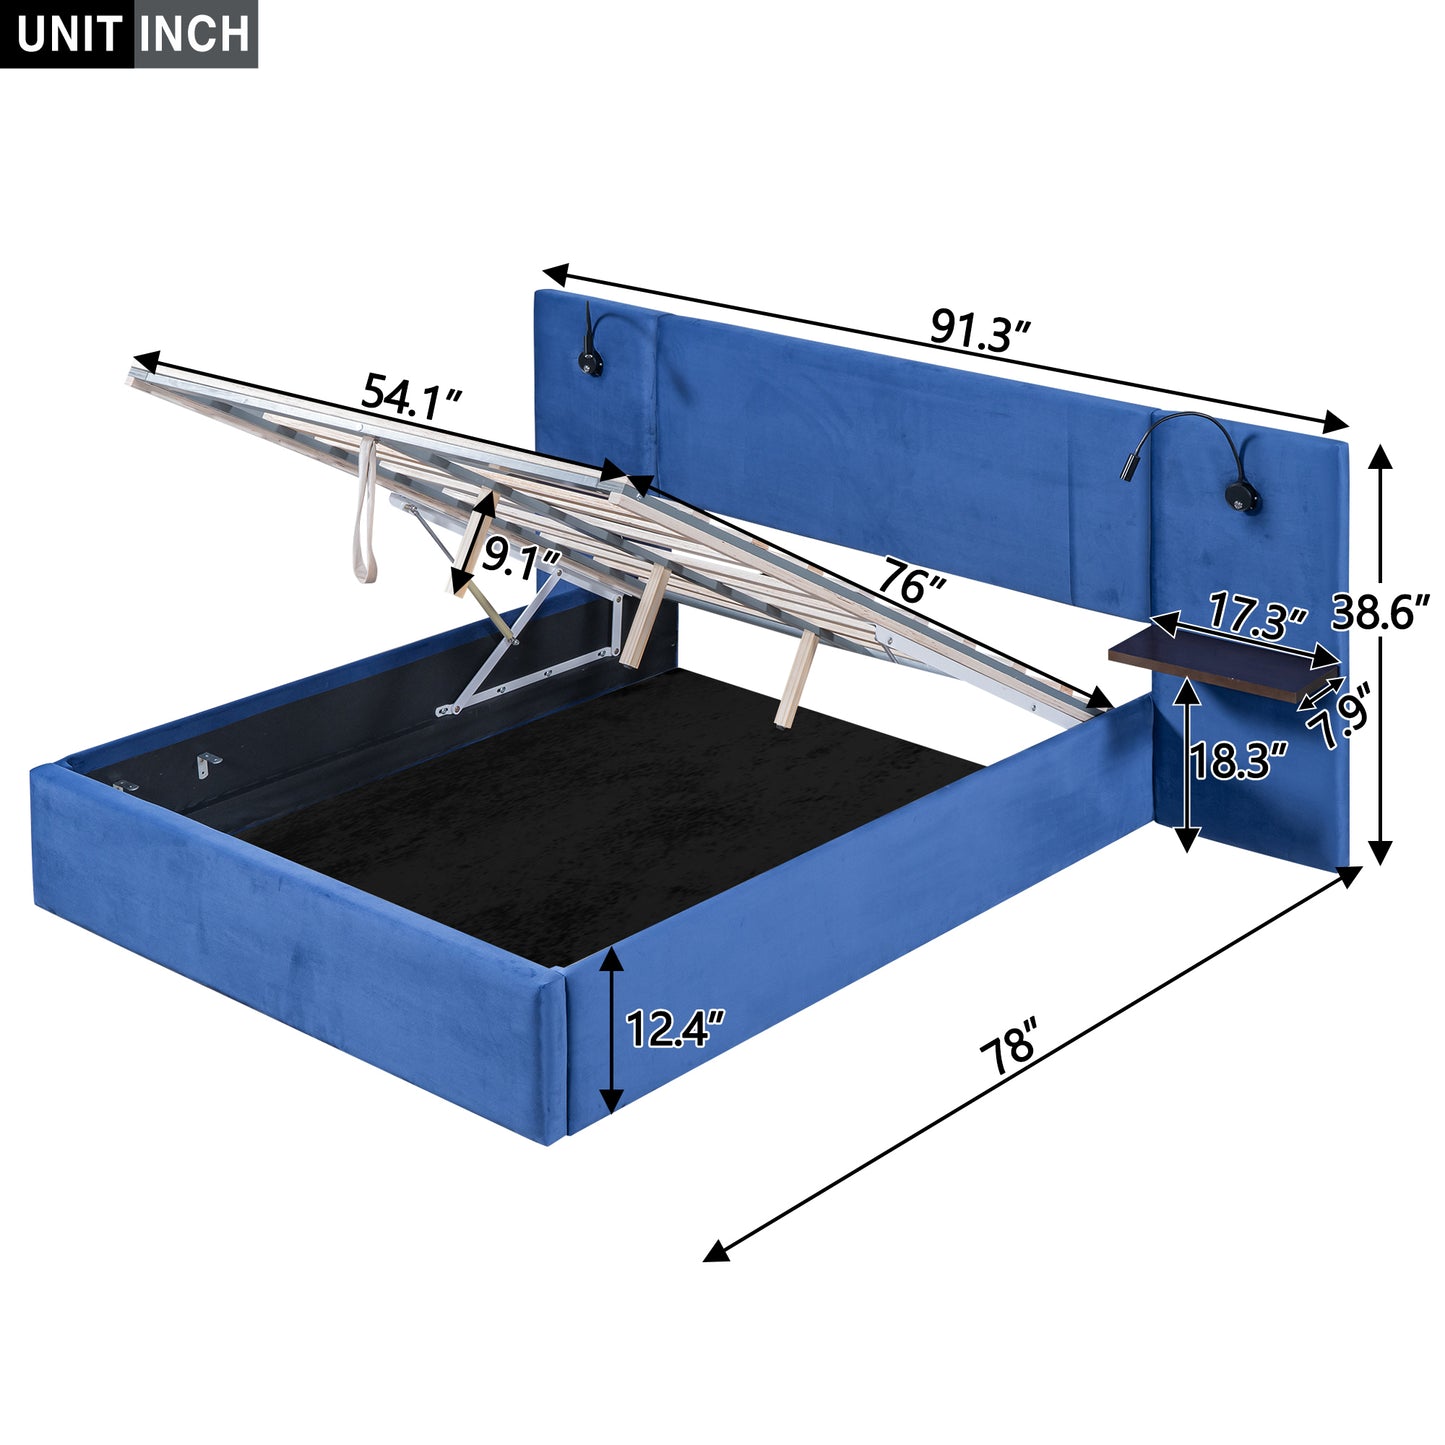 Full Size Storage Upholstered Hydraulic Platform Bed with 2 Shelves, 2 Lights and USB, Blue